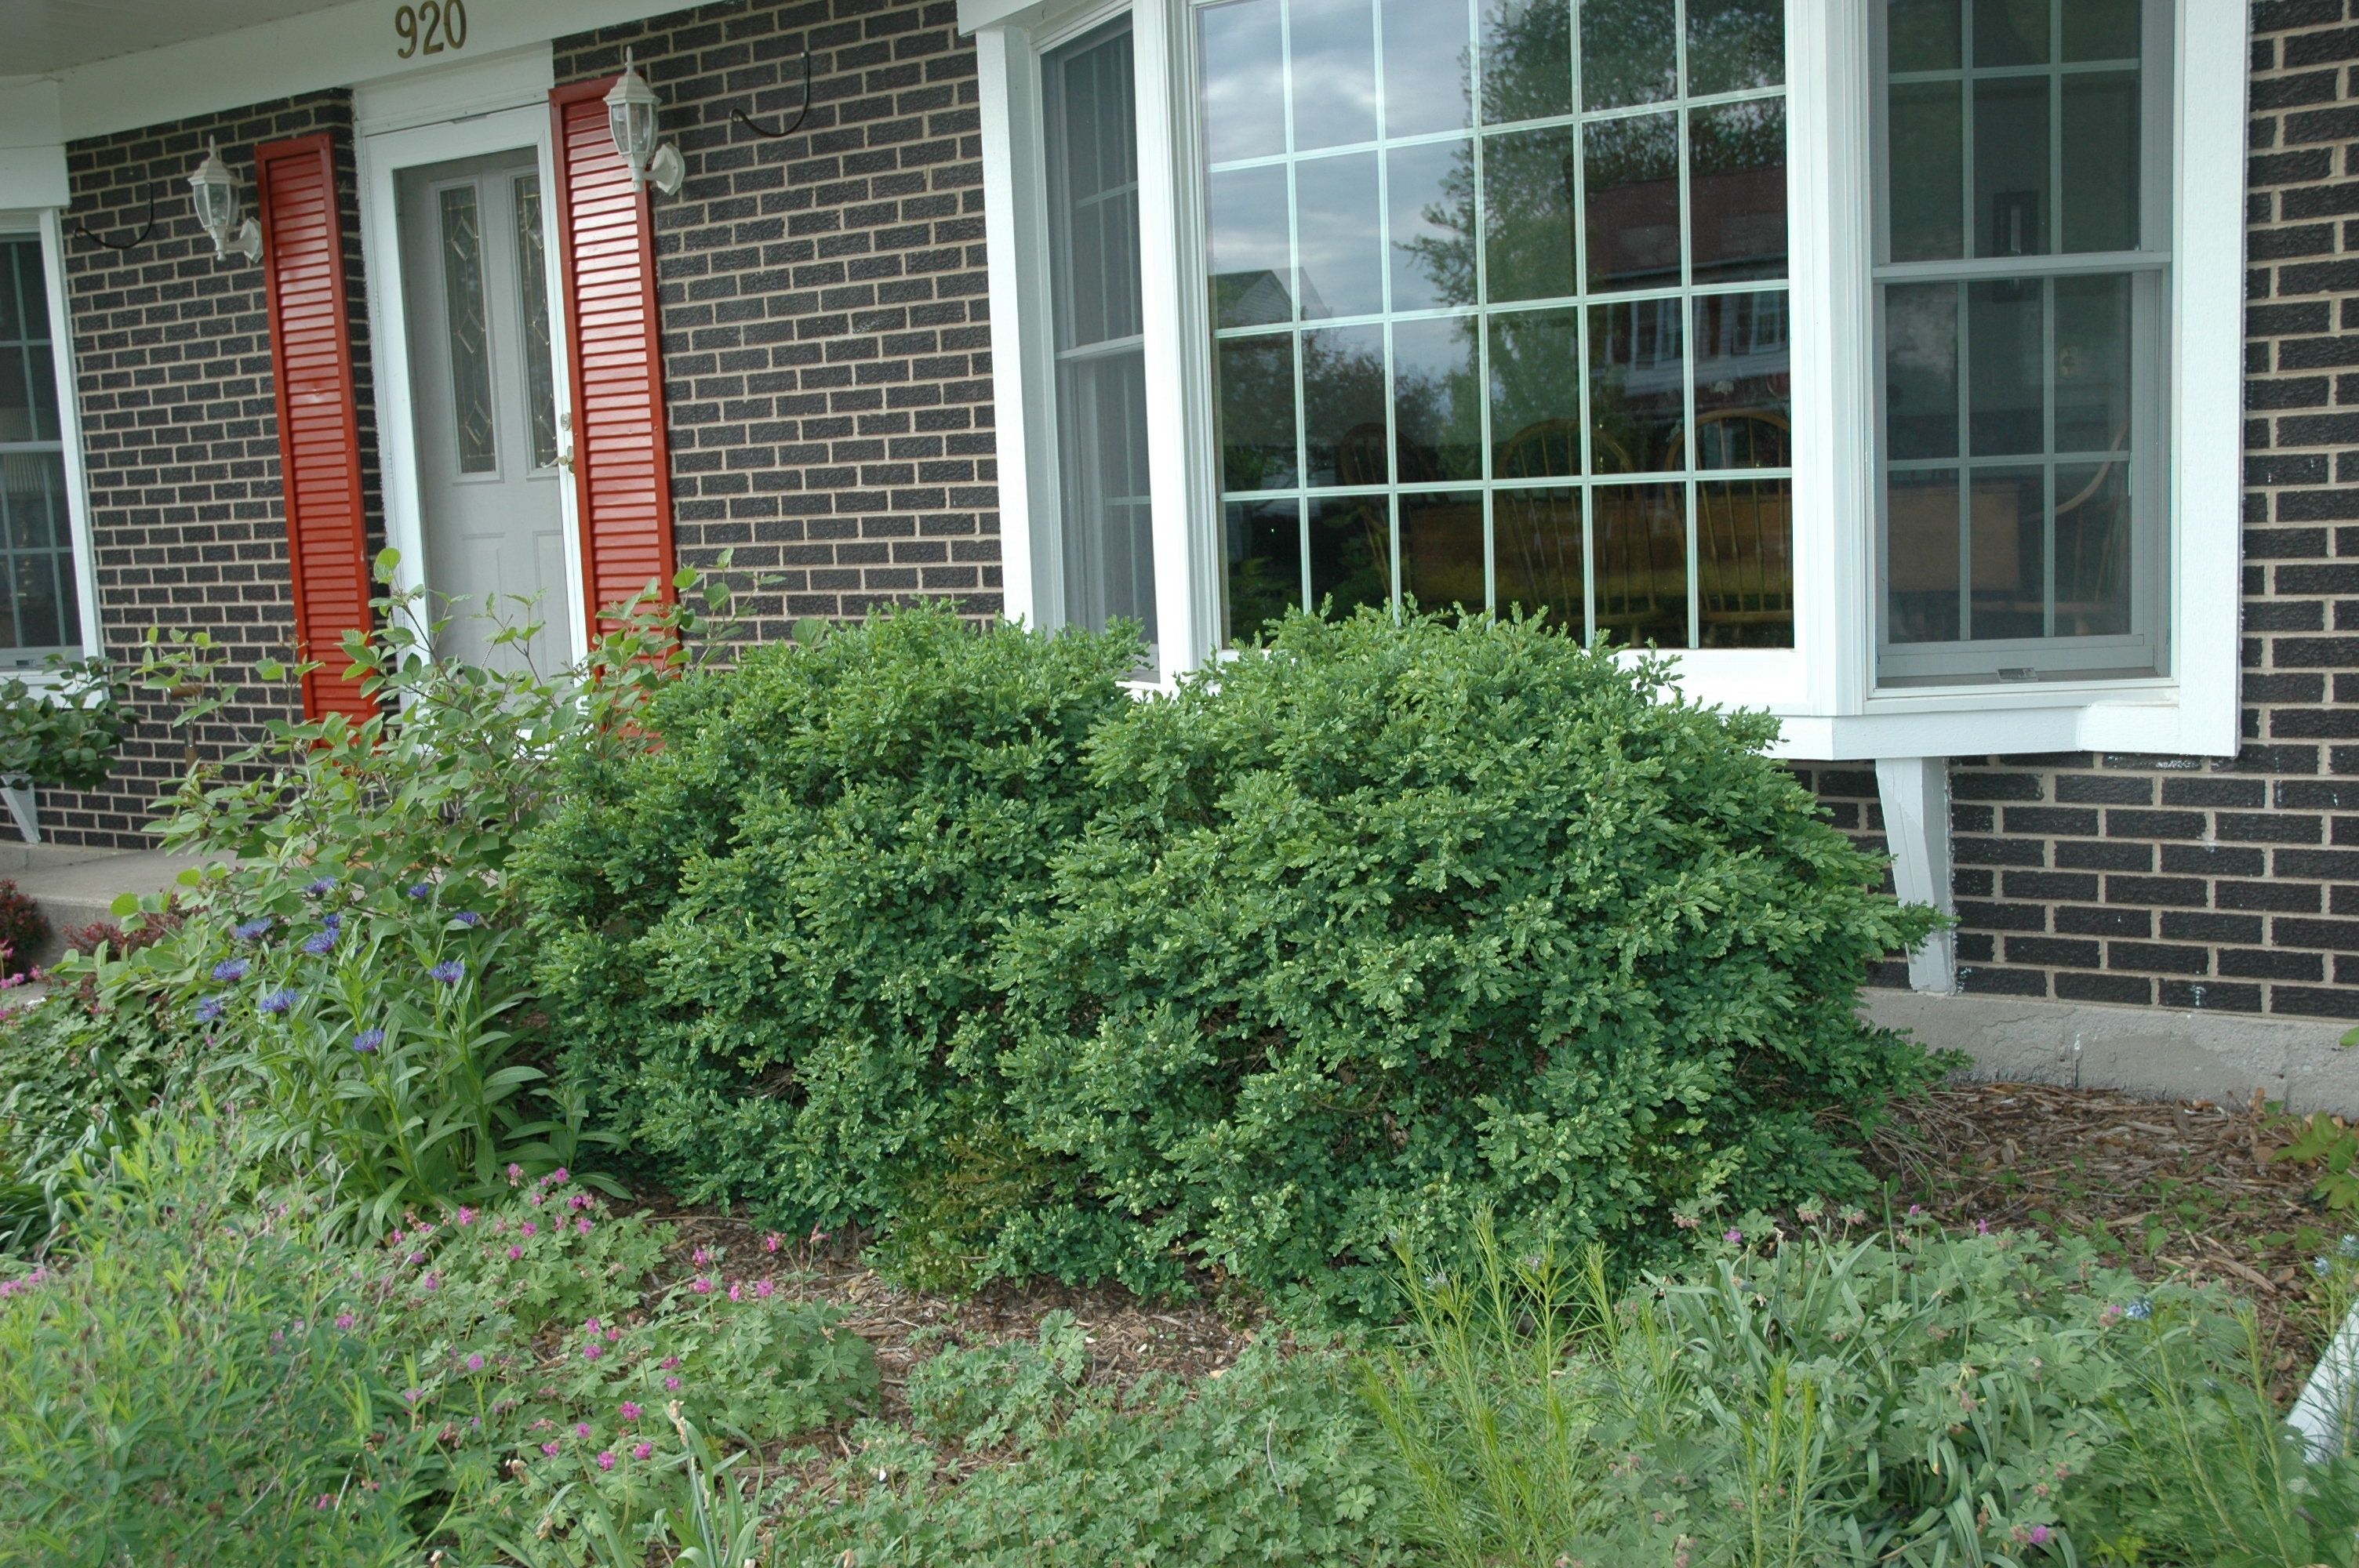 images/plants/buxus/bux-chicagoland-green/bux-chicagoland-green-0006.jpg